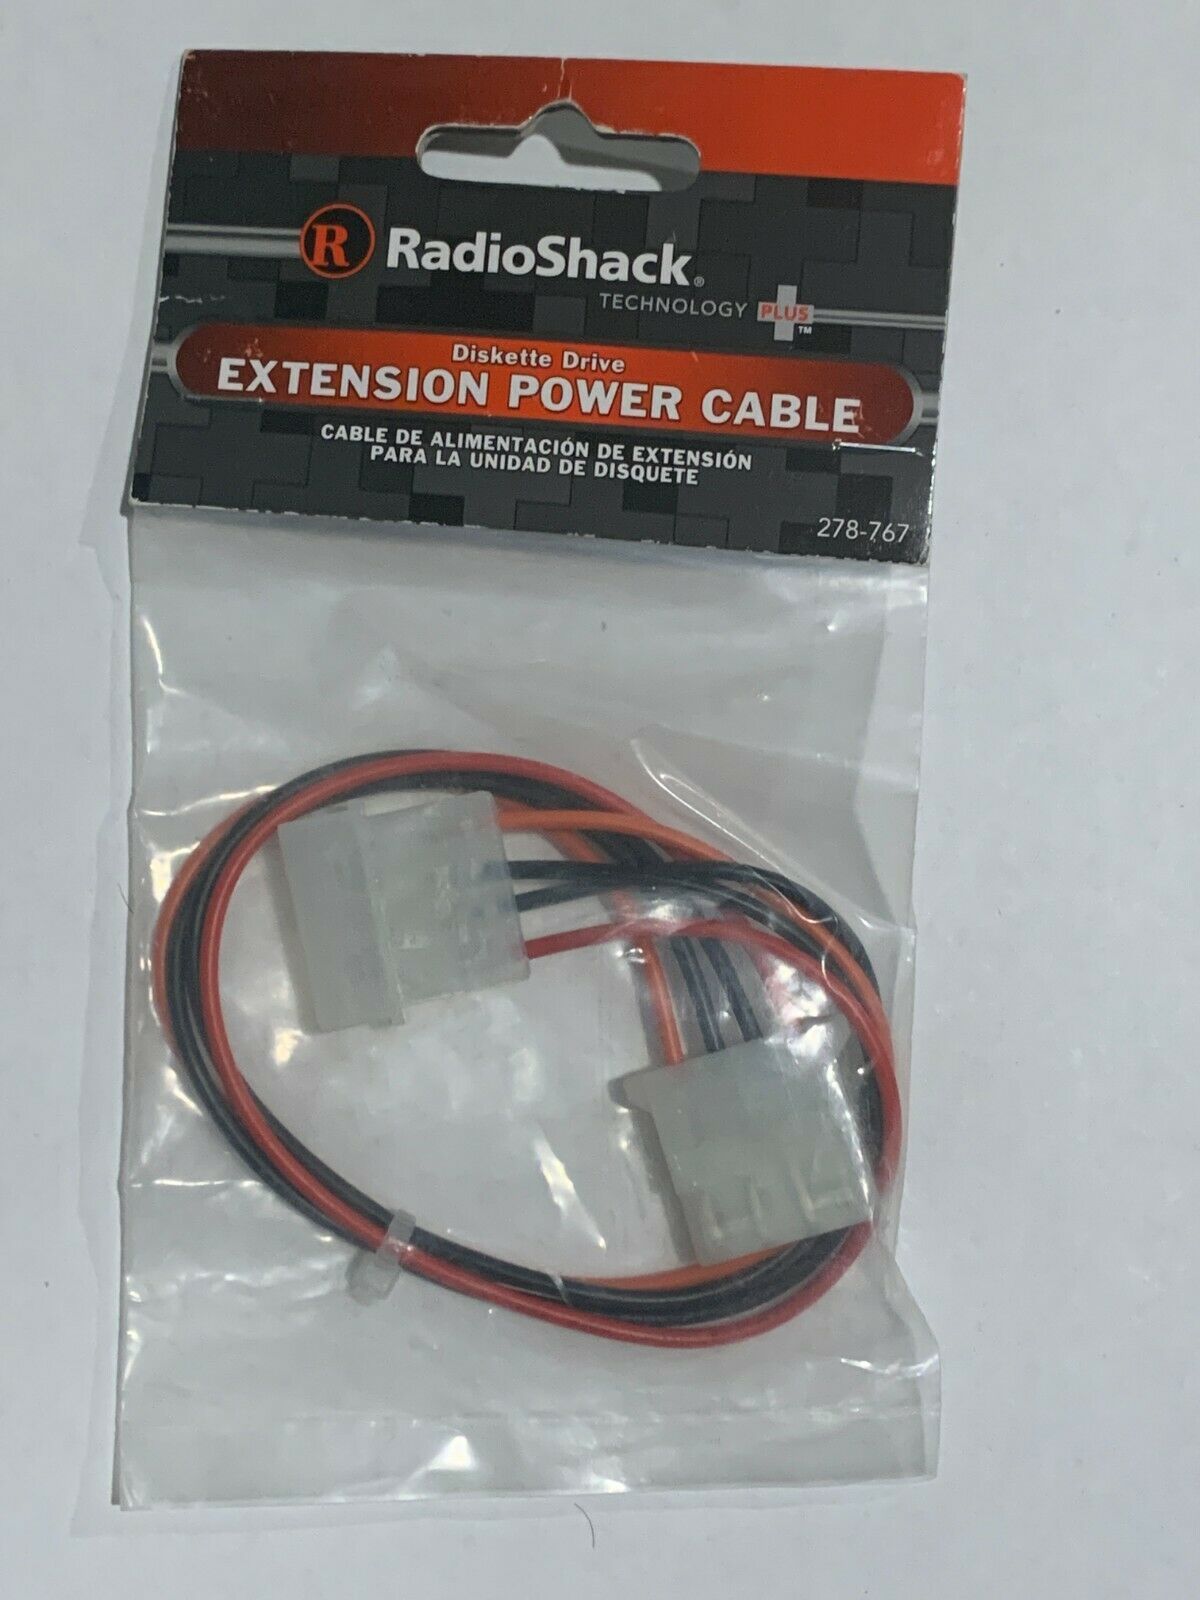 Radio Shack Disk Drive 10" Power Extension Cable 278-0767 278-767 Diskette Drive - $7.99